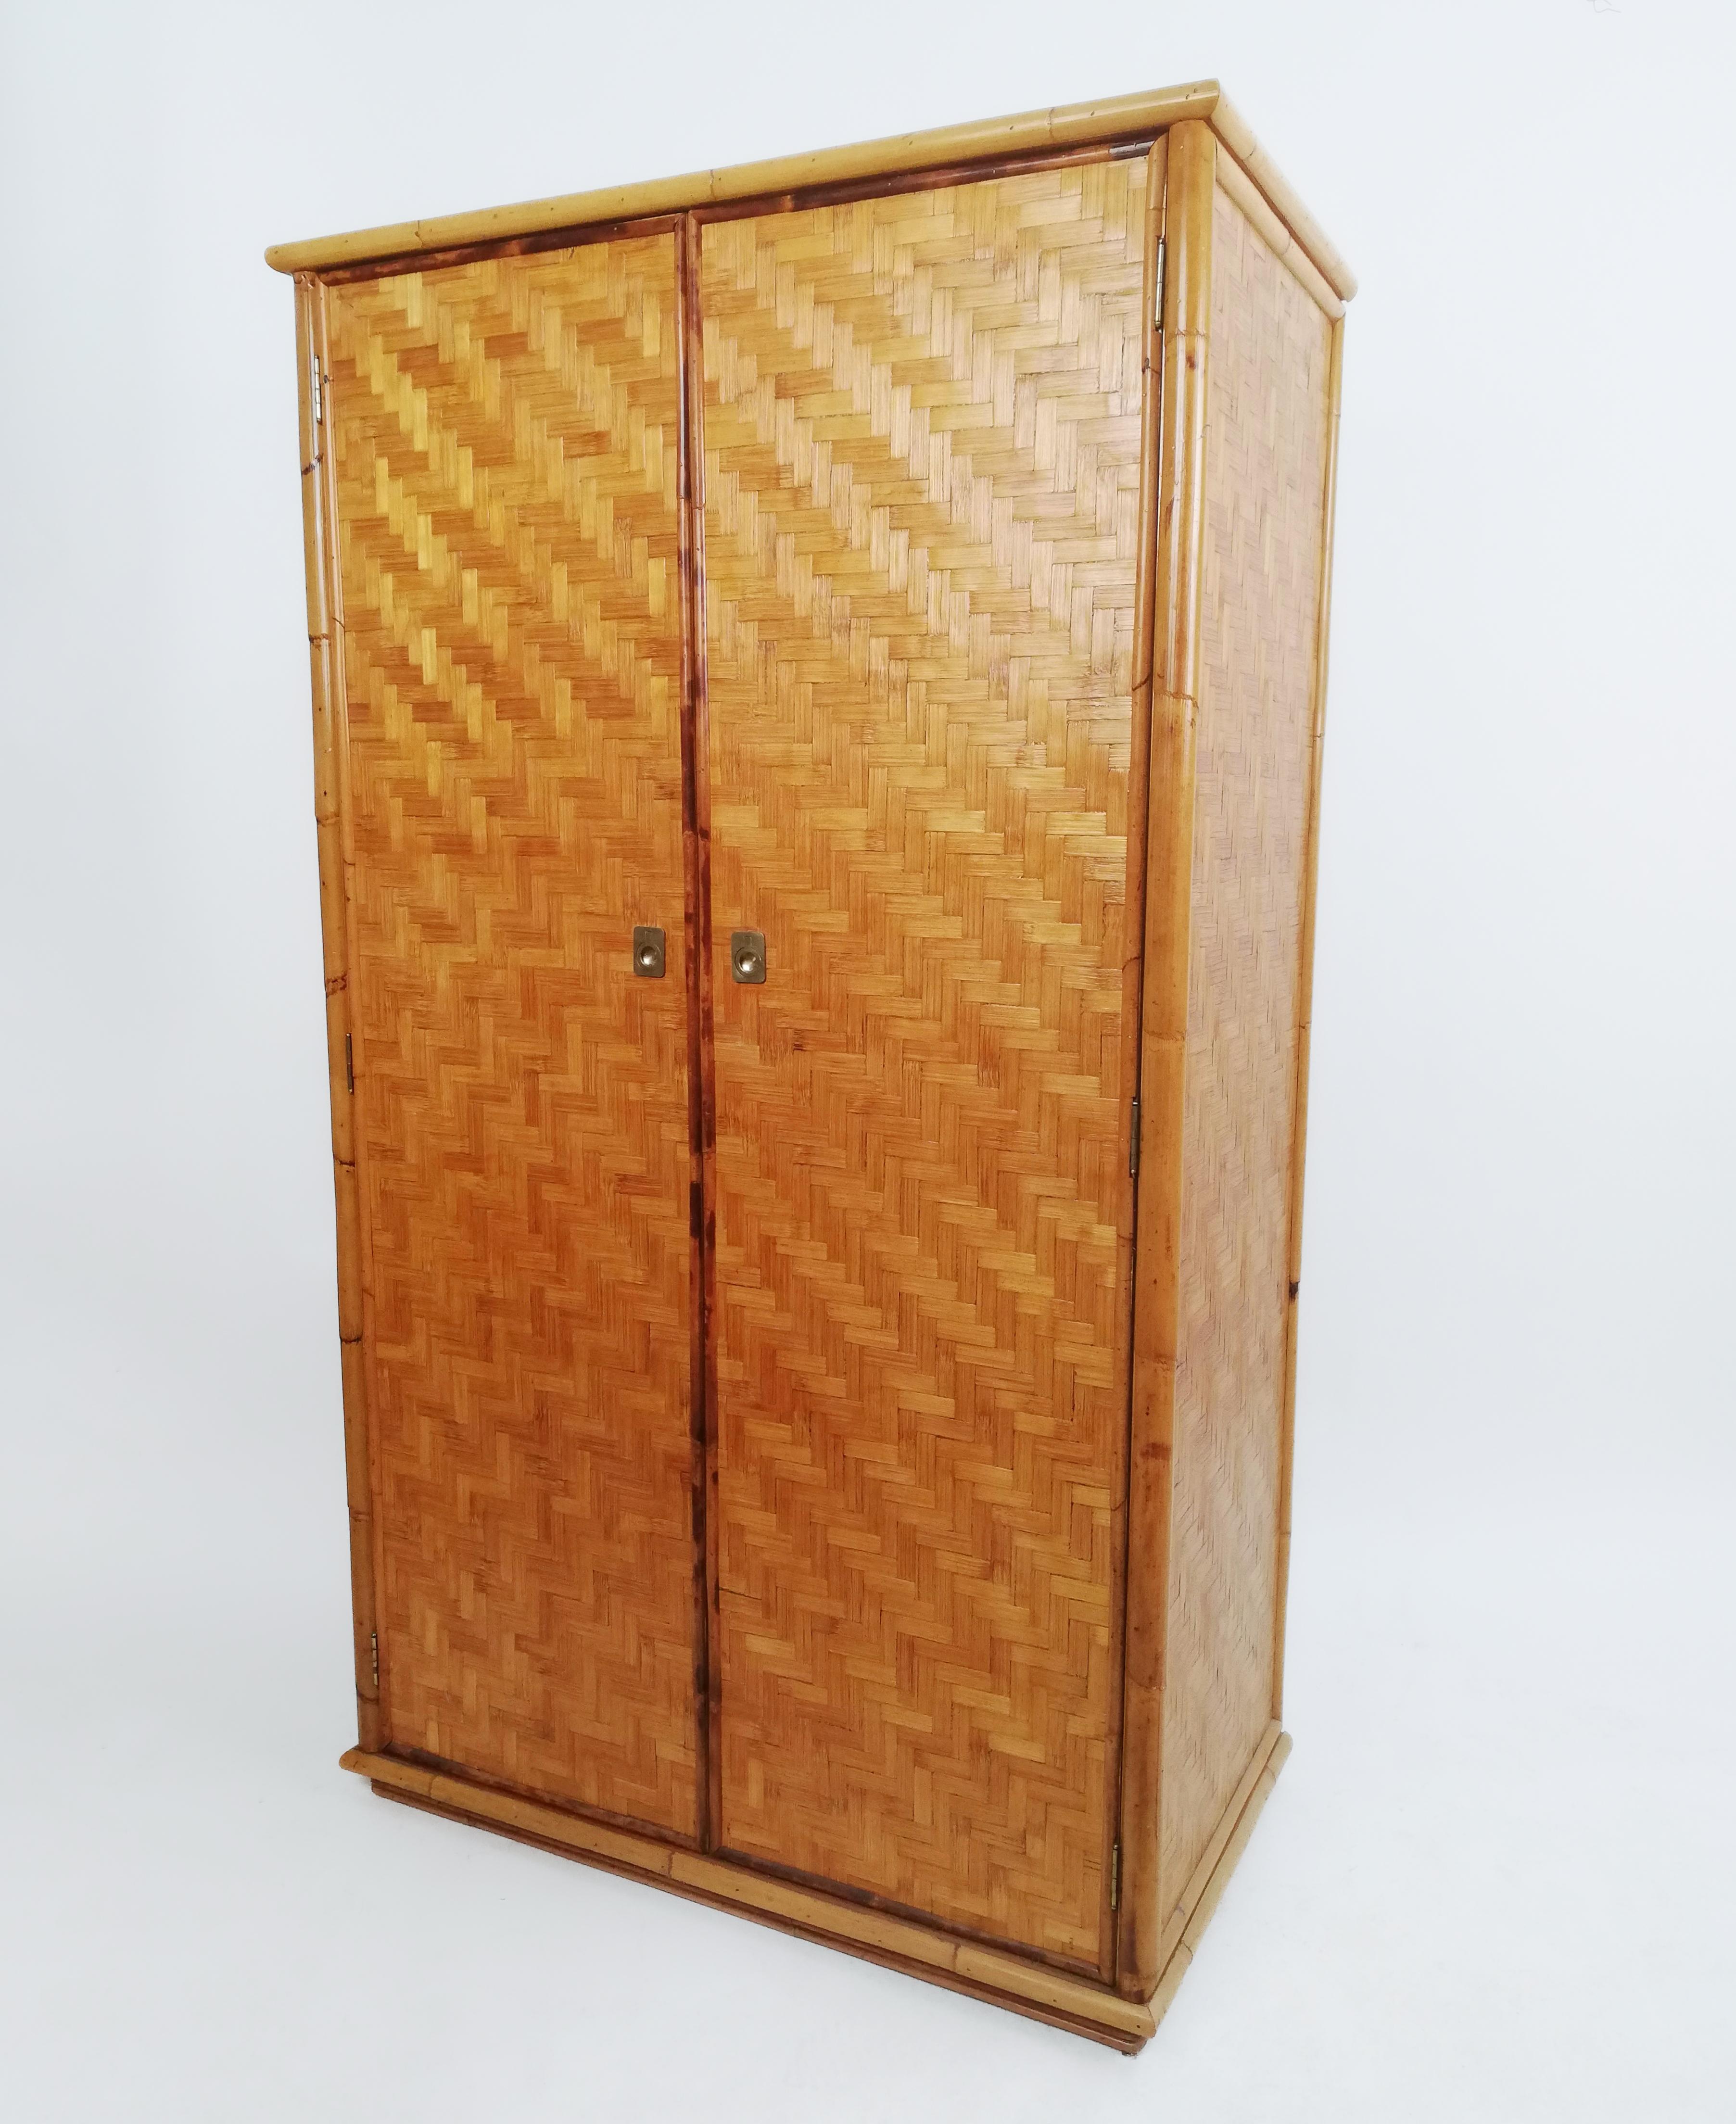 Vintage 2 Door Wardrobe in Wicker Cane, Rattan and Bamboo by Dal Vera, 1970s 3